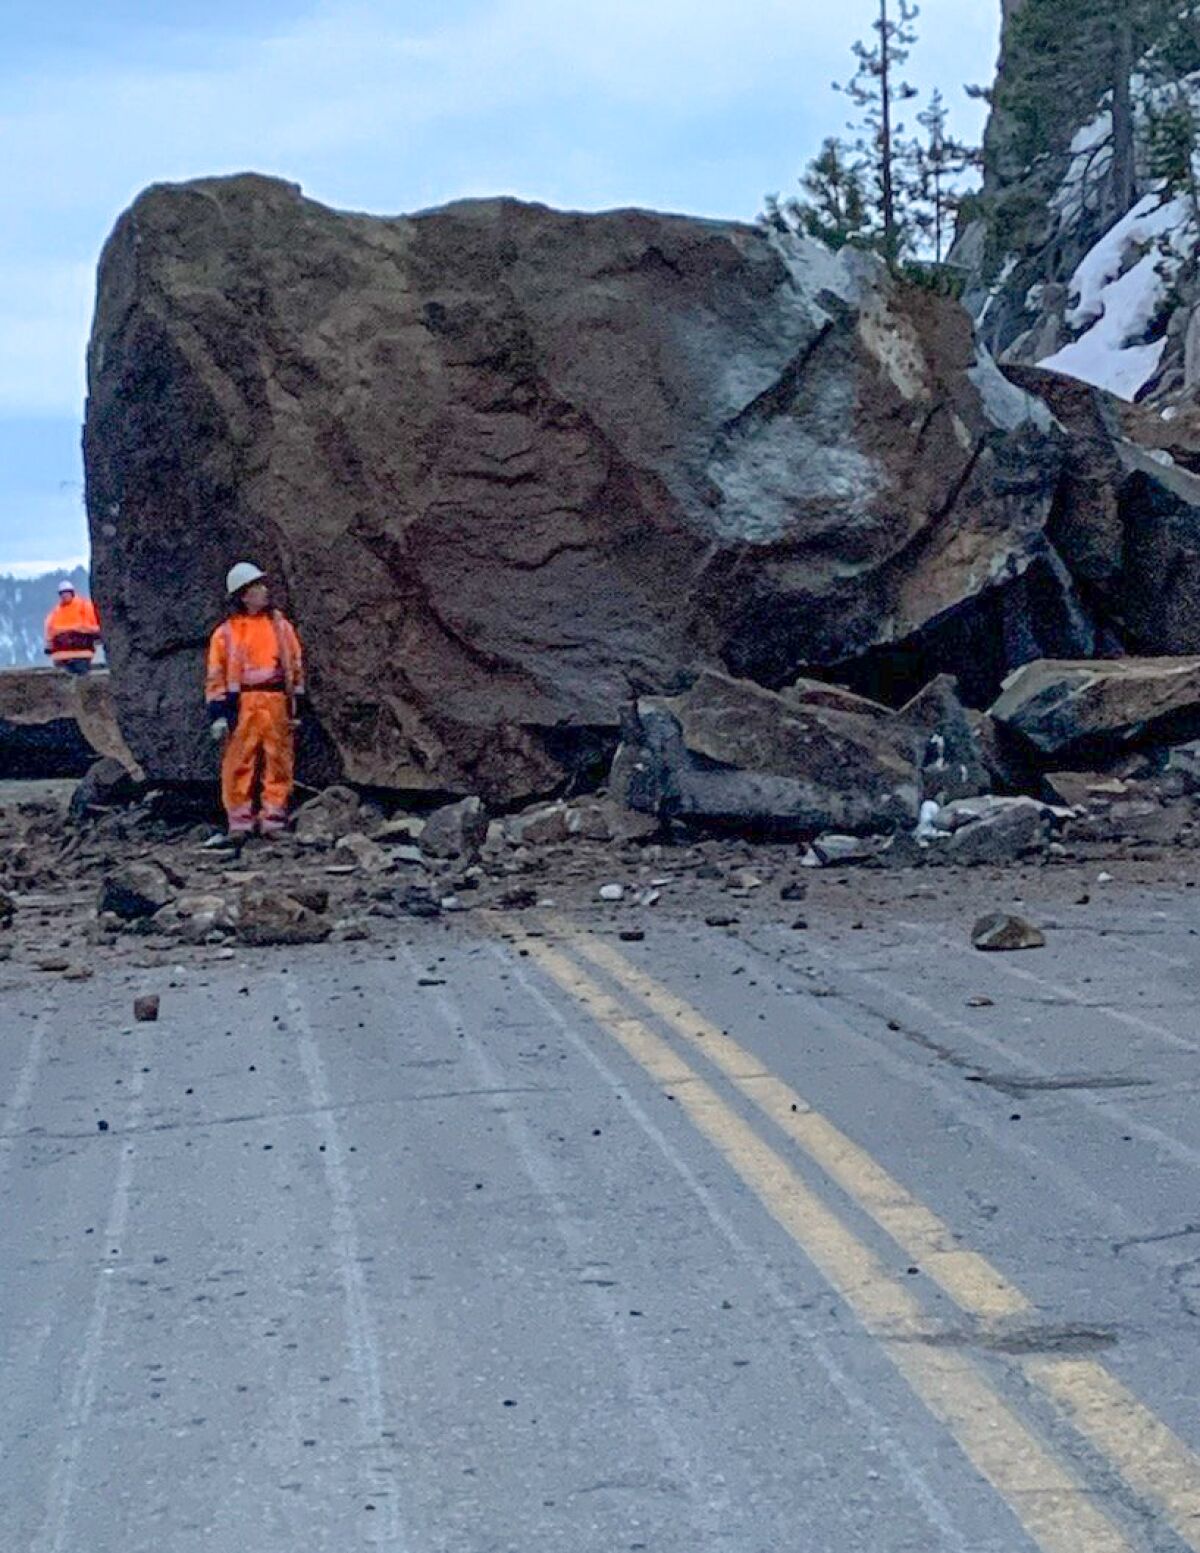 A boulder more than twice as high as a nearby worker blocks a two-lane highway